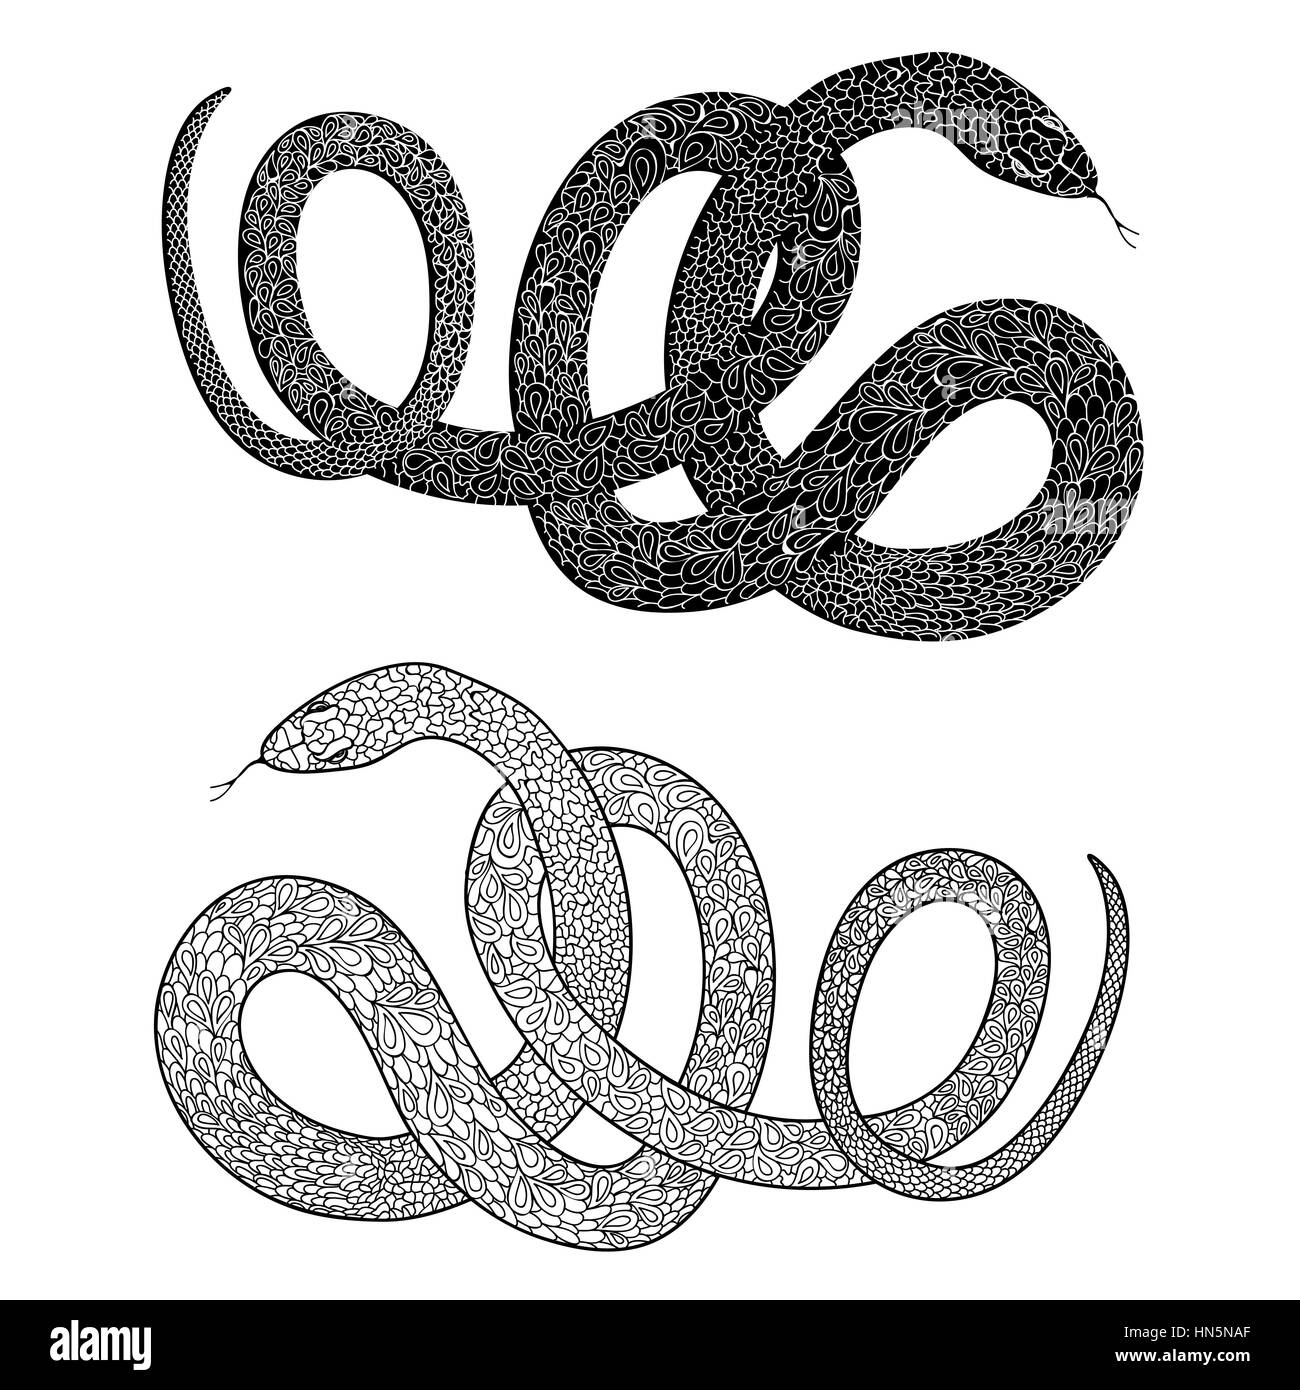 Snake set. Engraved hand drawn vector illustraction of ornamental decorated in zentagle style snakes. Stock Vector